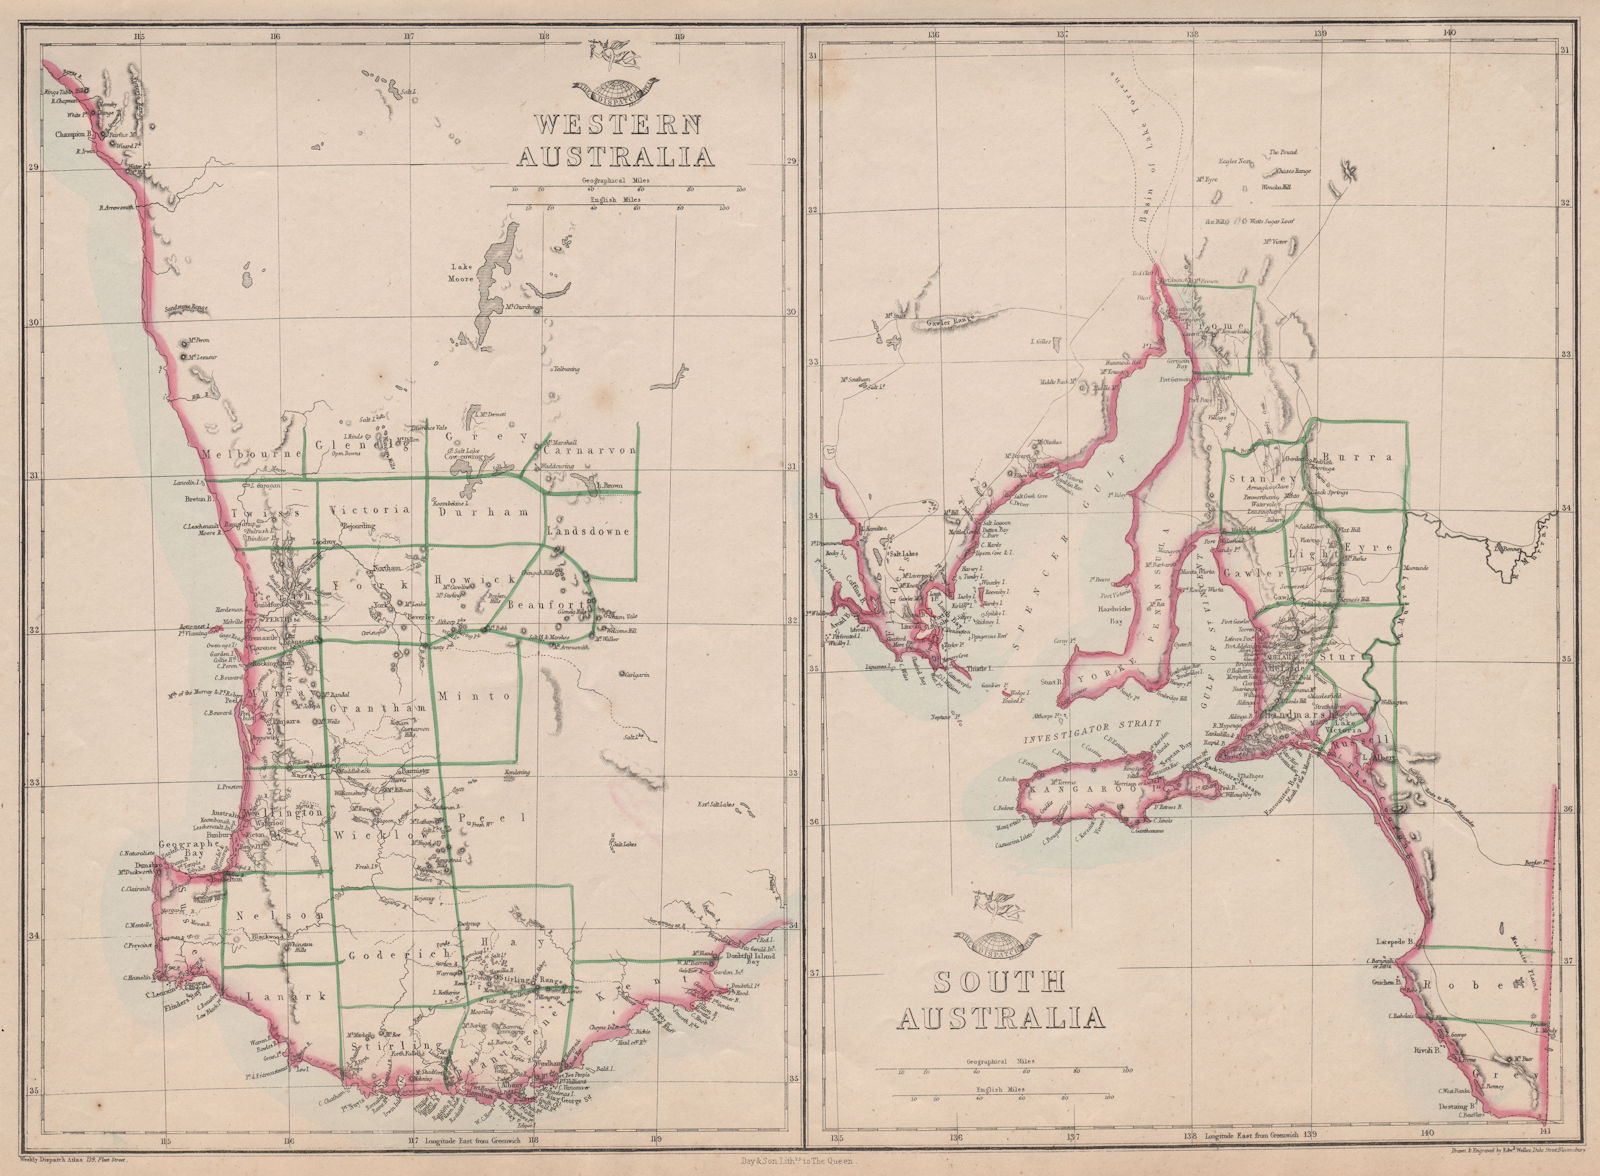 WESTERN & SOUTH AUSTRALIA. Land Divisions. Perth Adelaide. WELLER 1862 old map